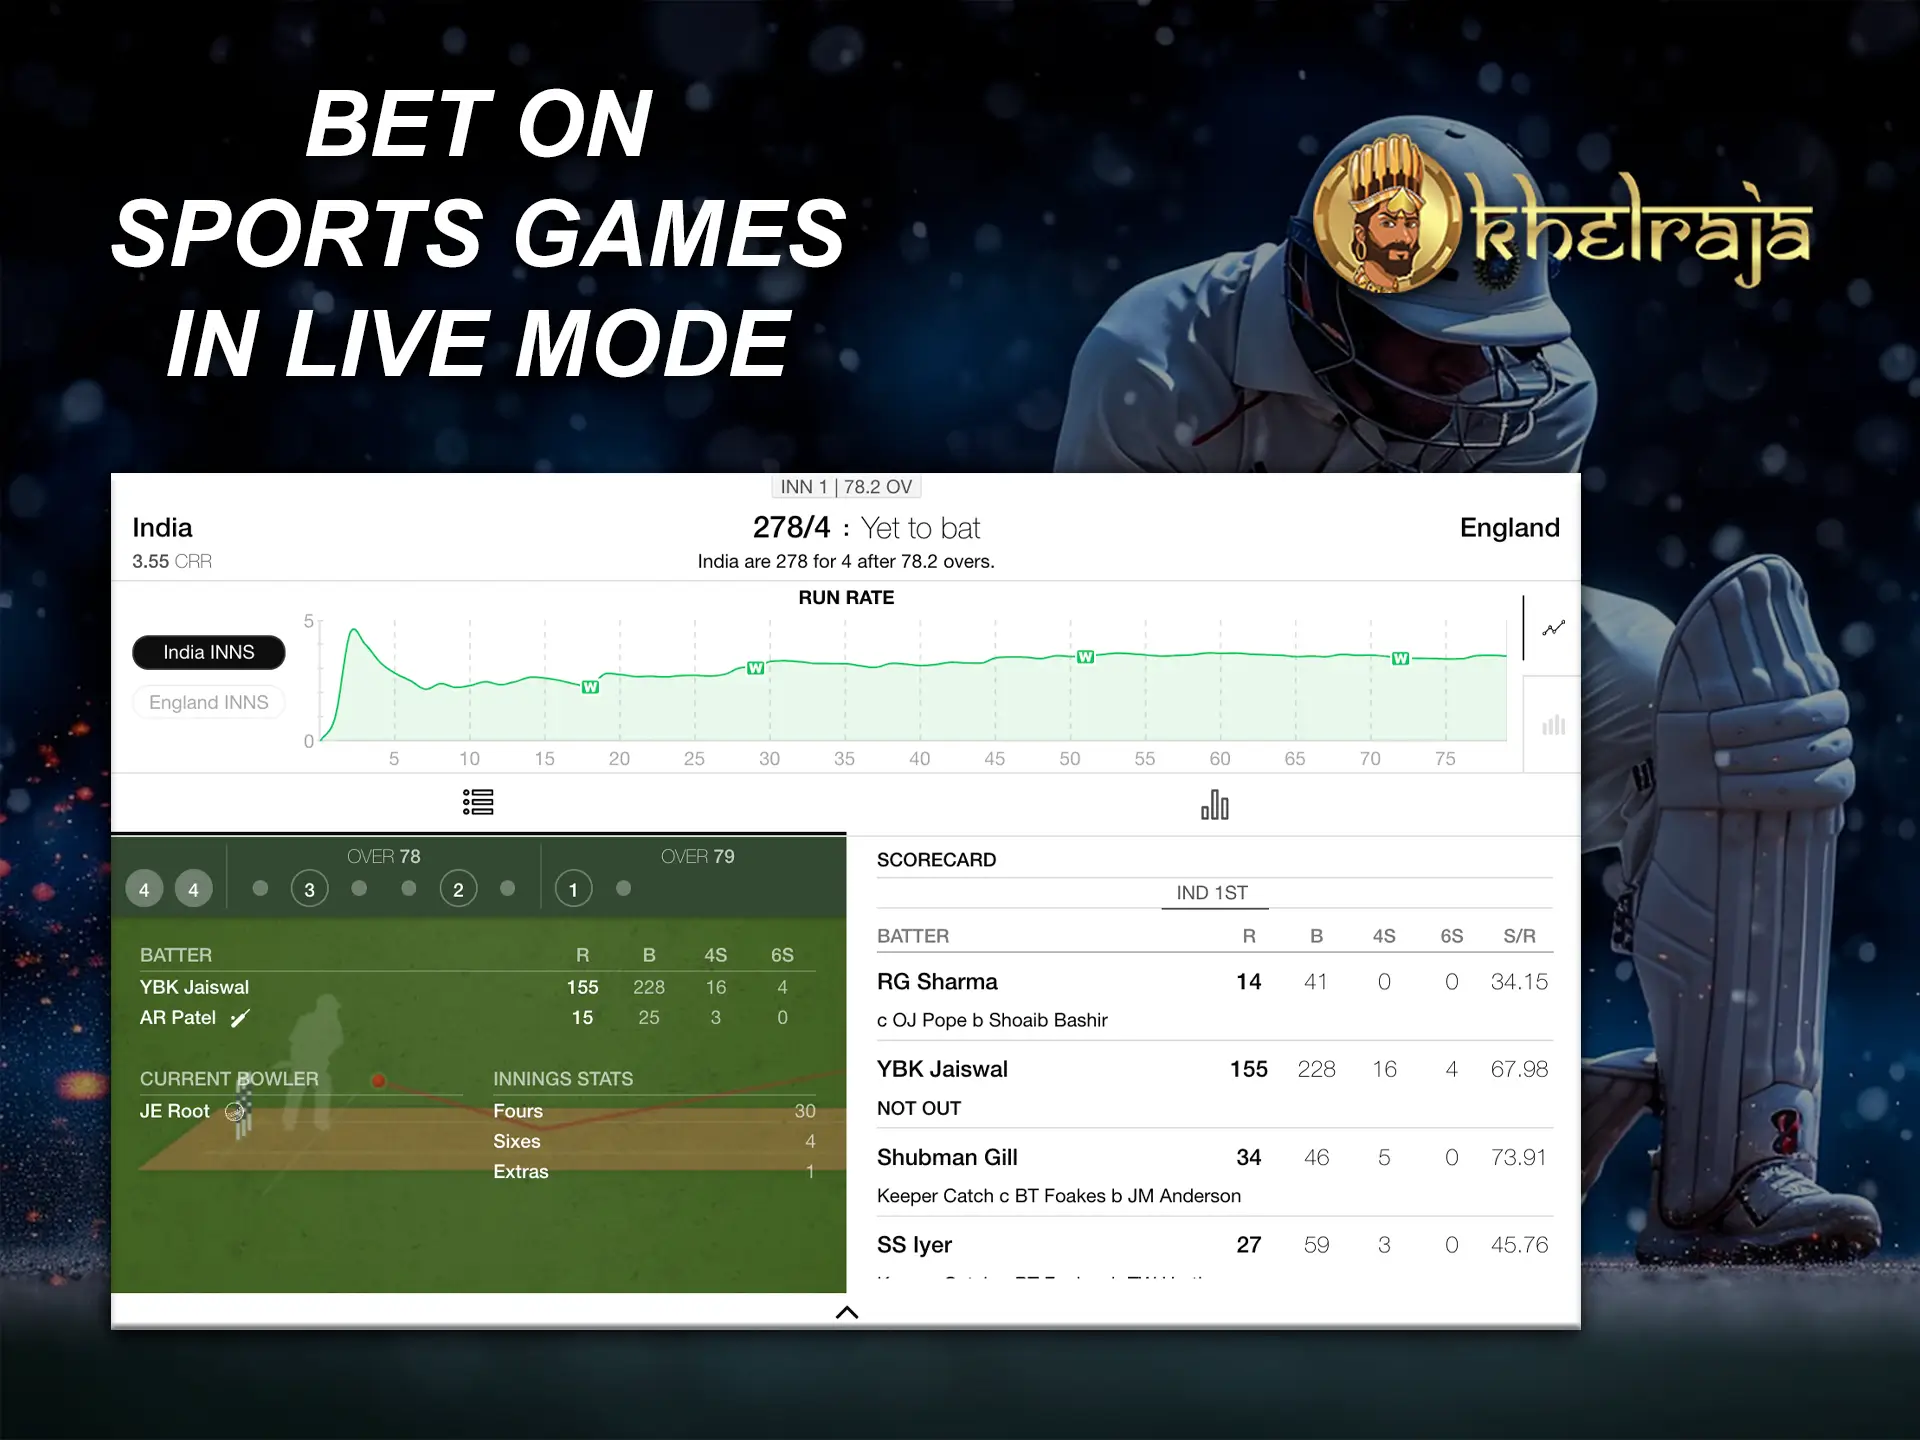 With live betting you are always in control of the field and can see the statistics using the Khelraja website.